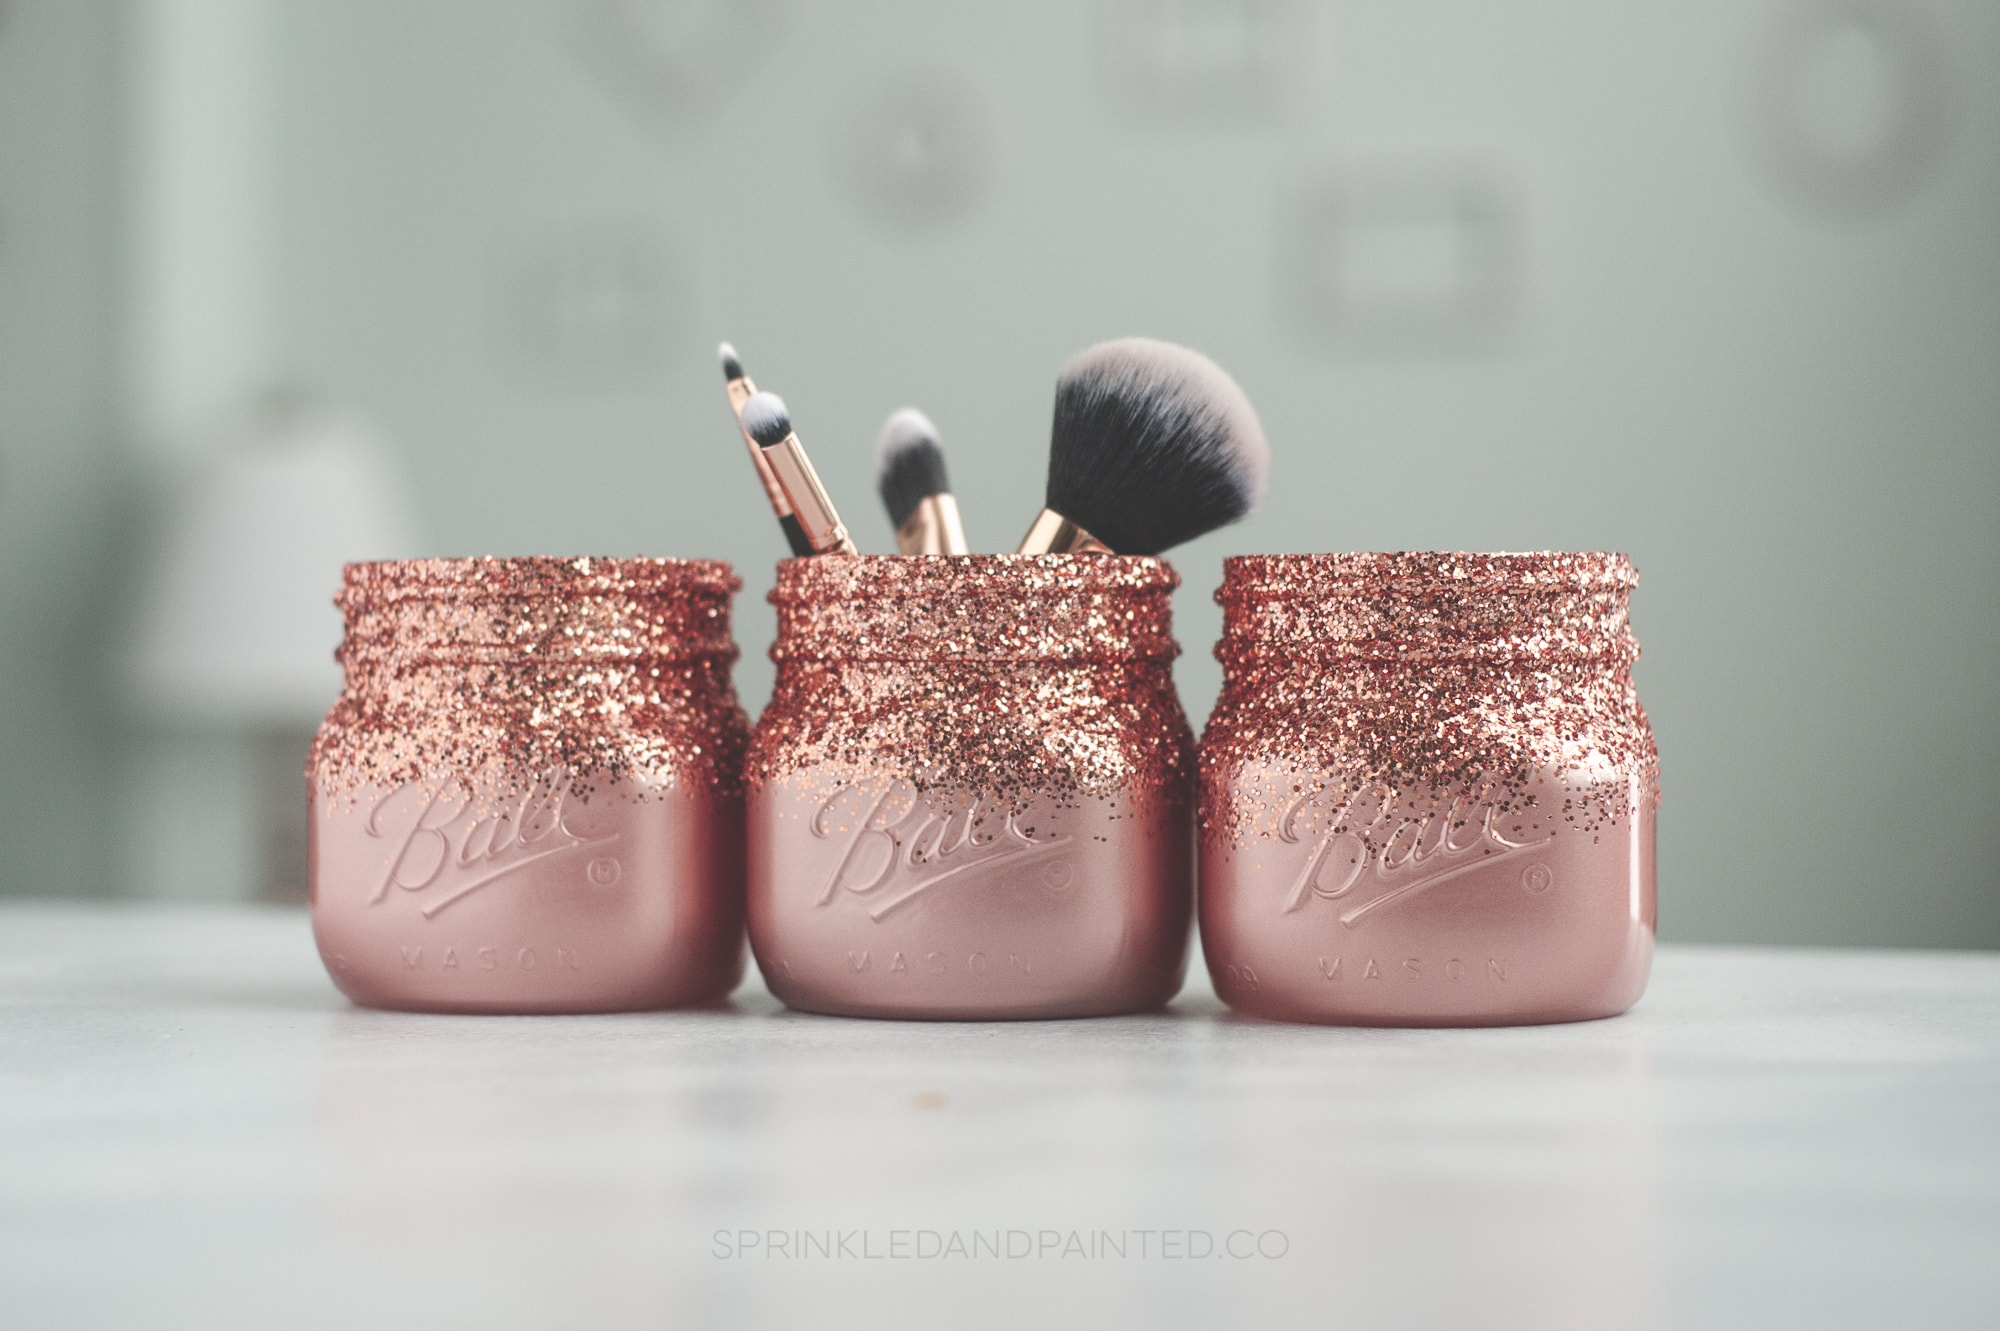 Three rose gold glitter mason jars, one with makeup brushes inside.